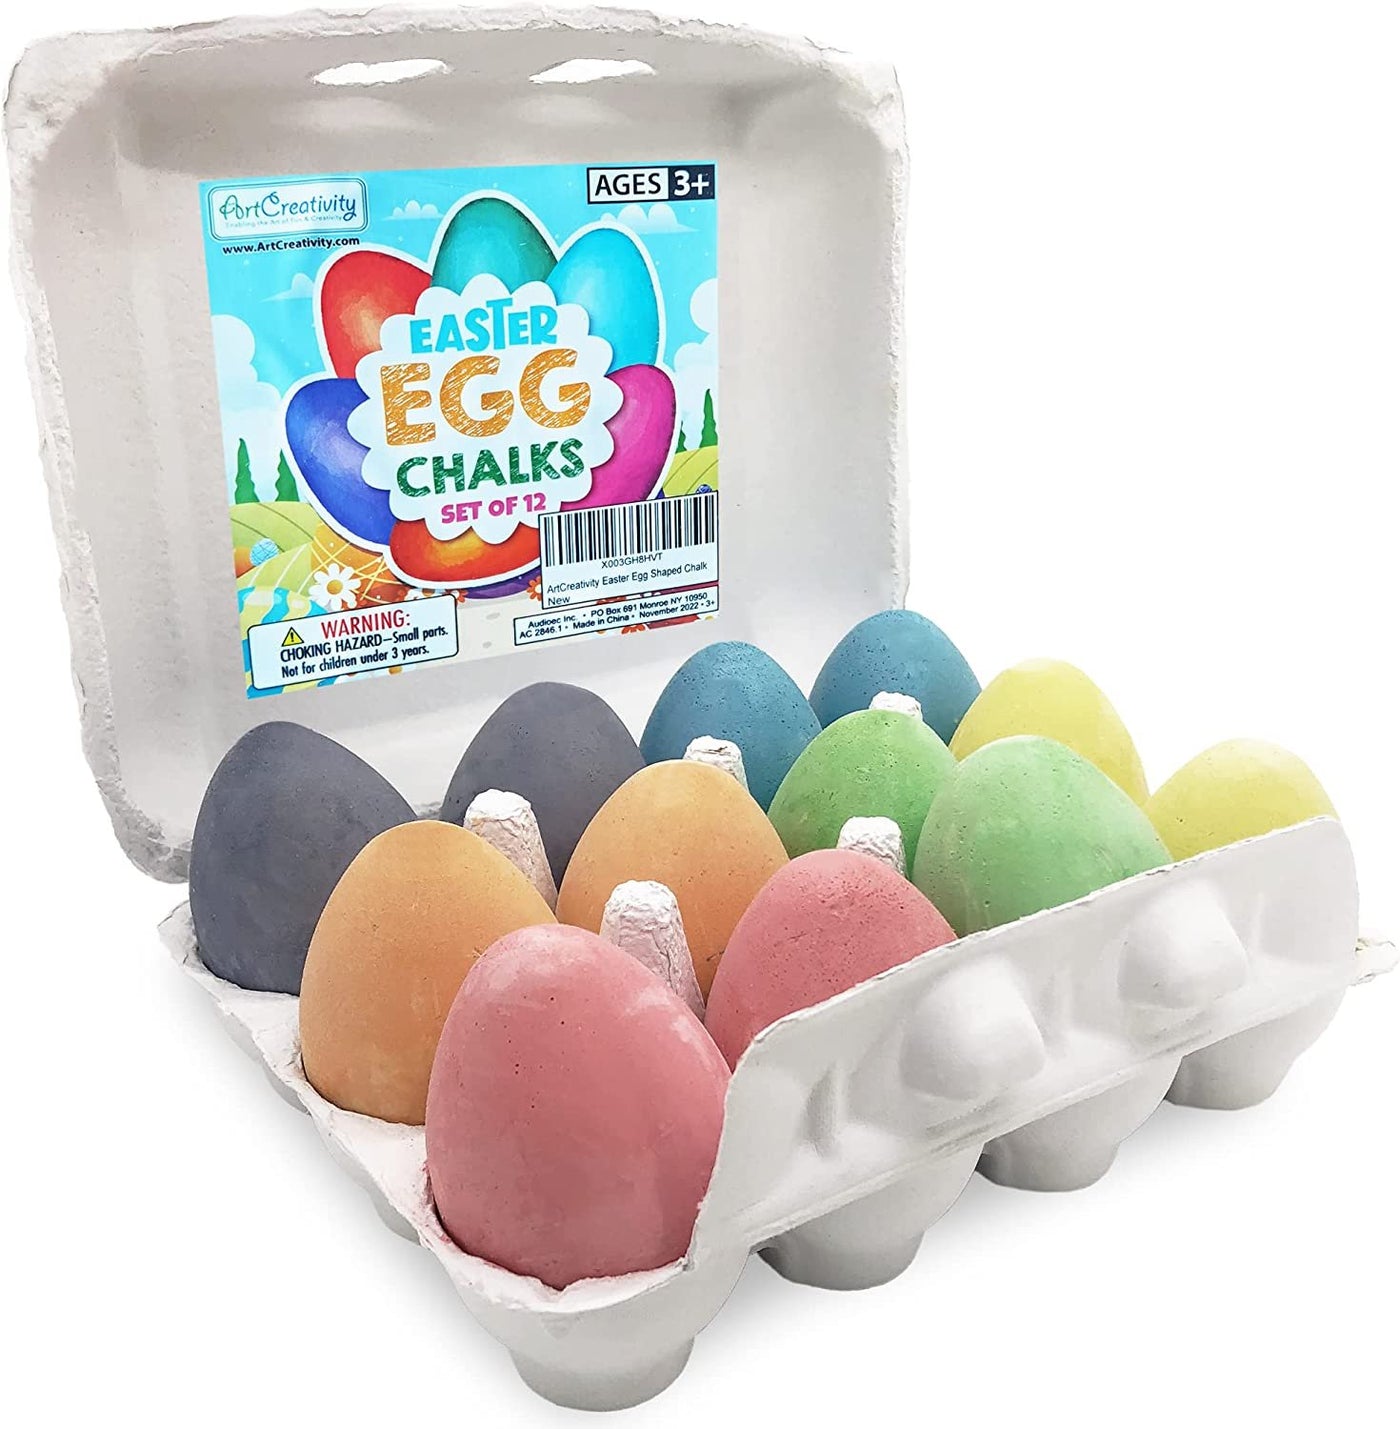 48 Piece Sidewalk Chalk Assortment of Colors Great for Playing Outdoors  Comes with a Convenient Carrying Case and Handle - Toys 4 U